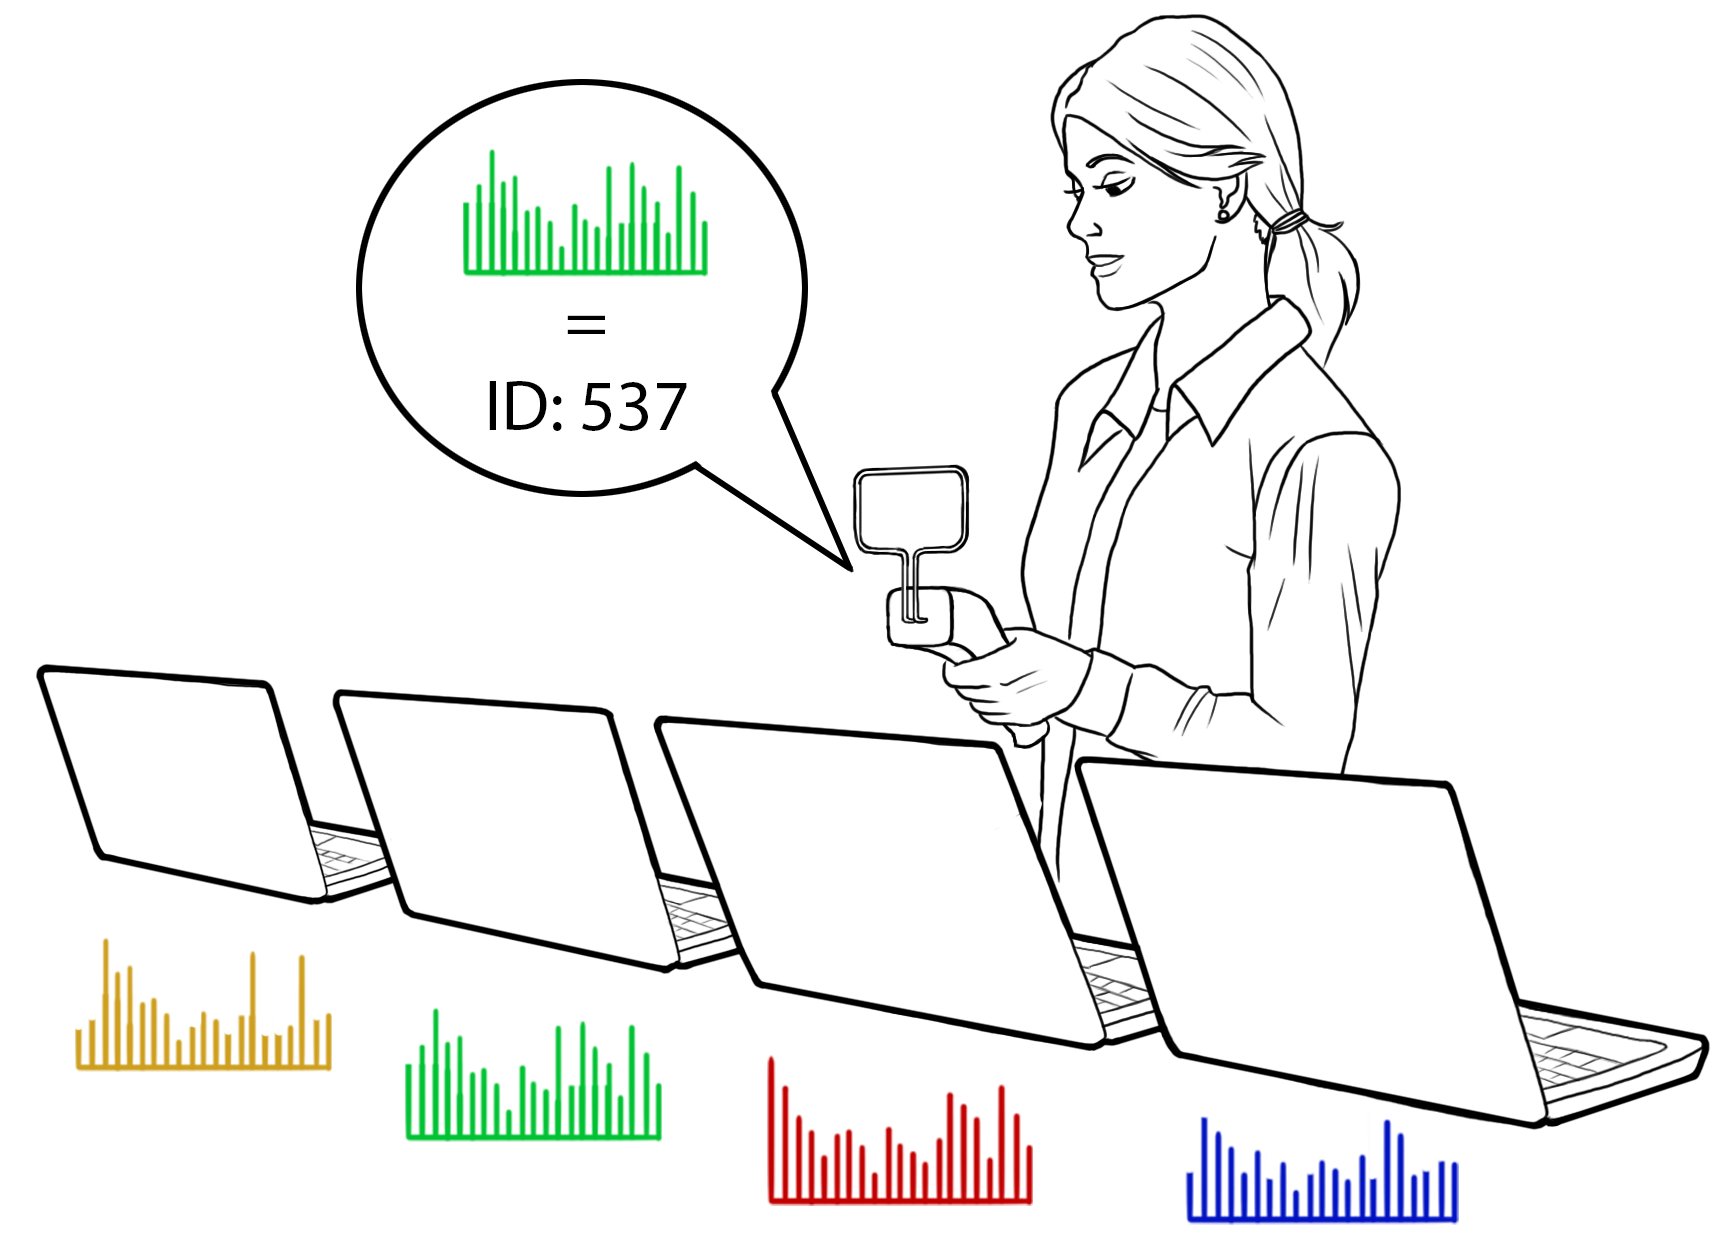 EM-ID- Tag-less Identification of Electrical Devices via Electromagnetic Emissions-Image